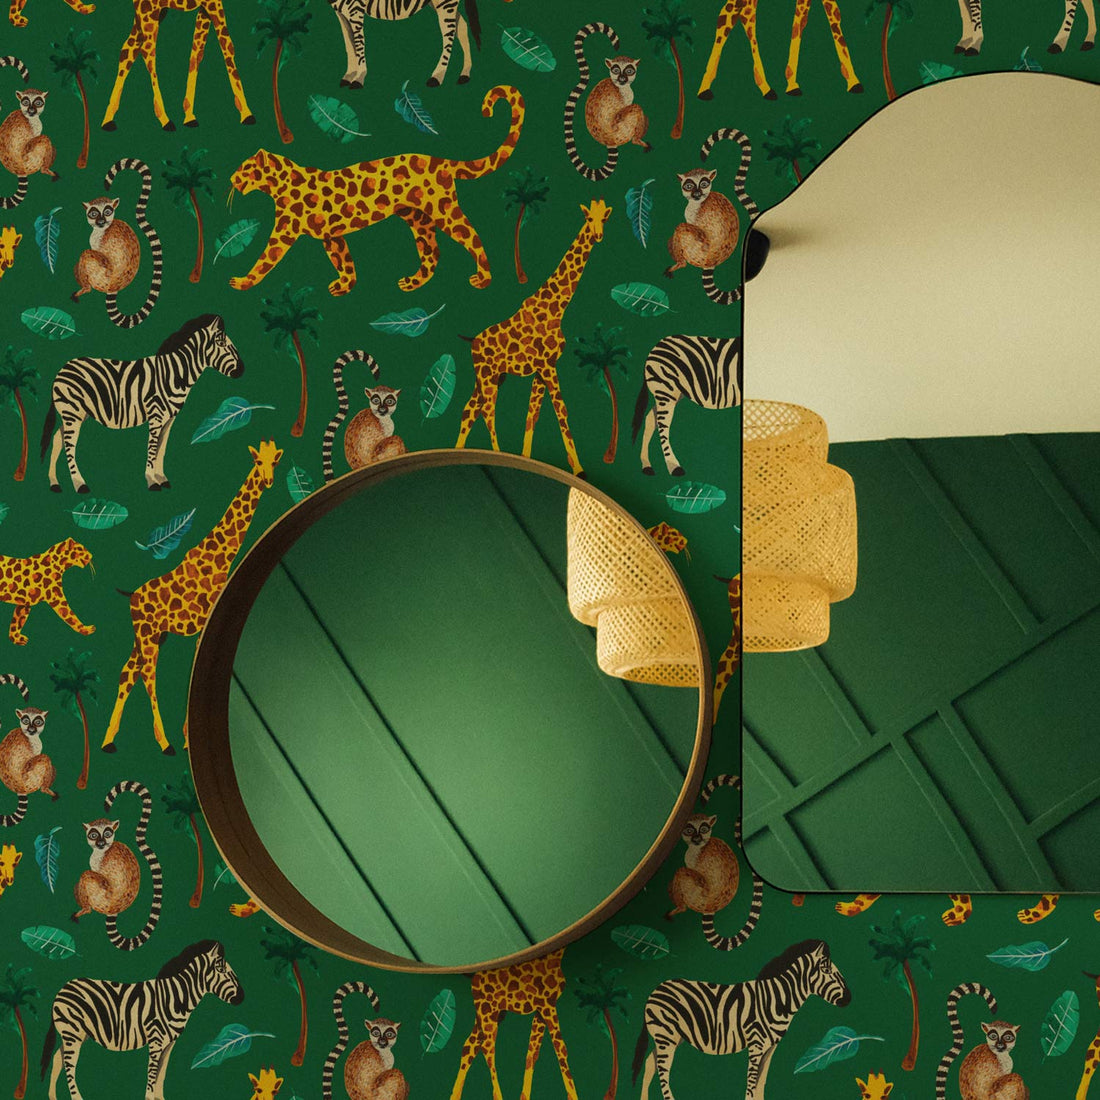 green jungle print wallpaper with african decor